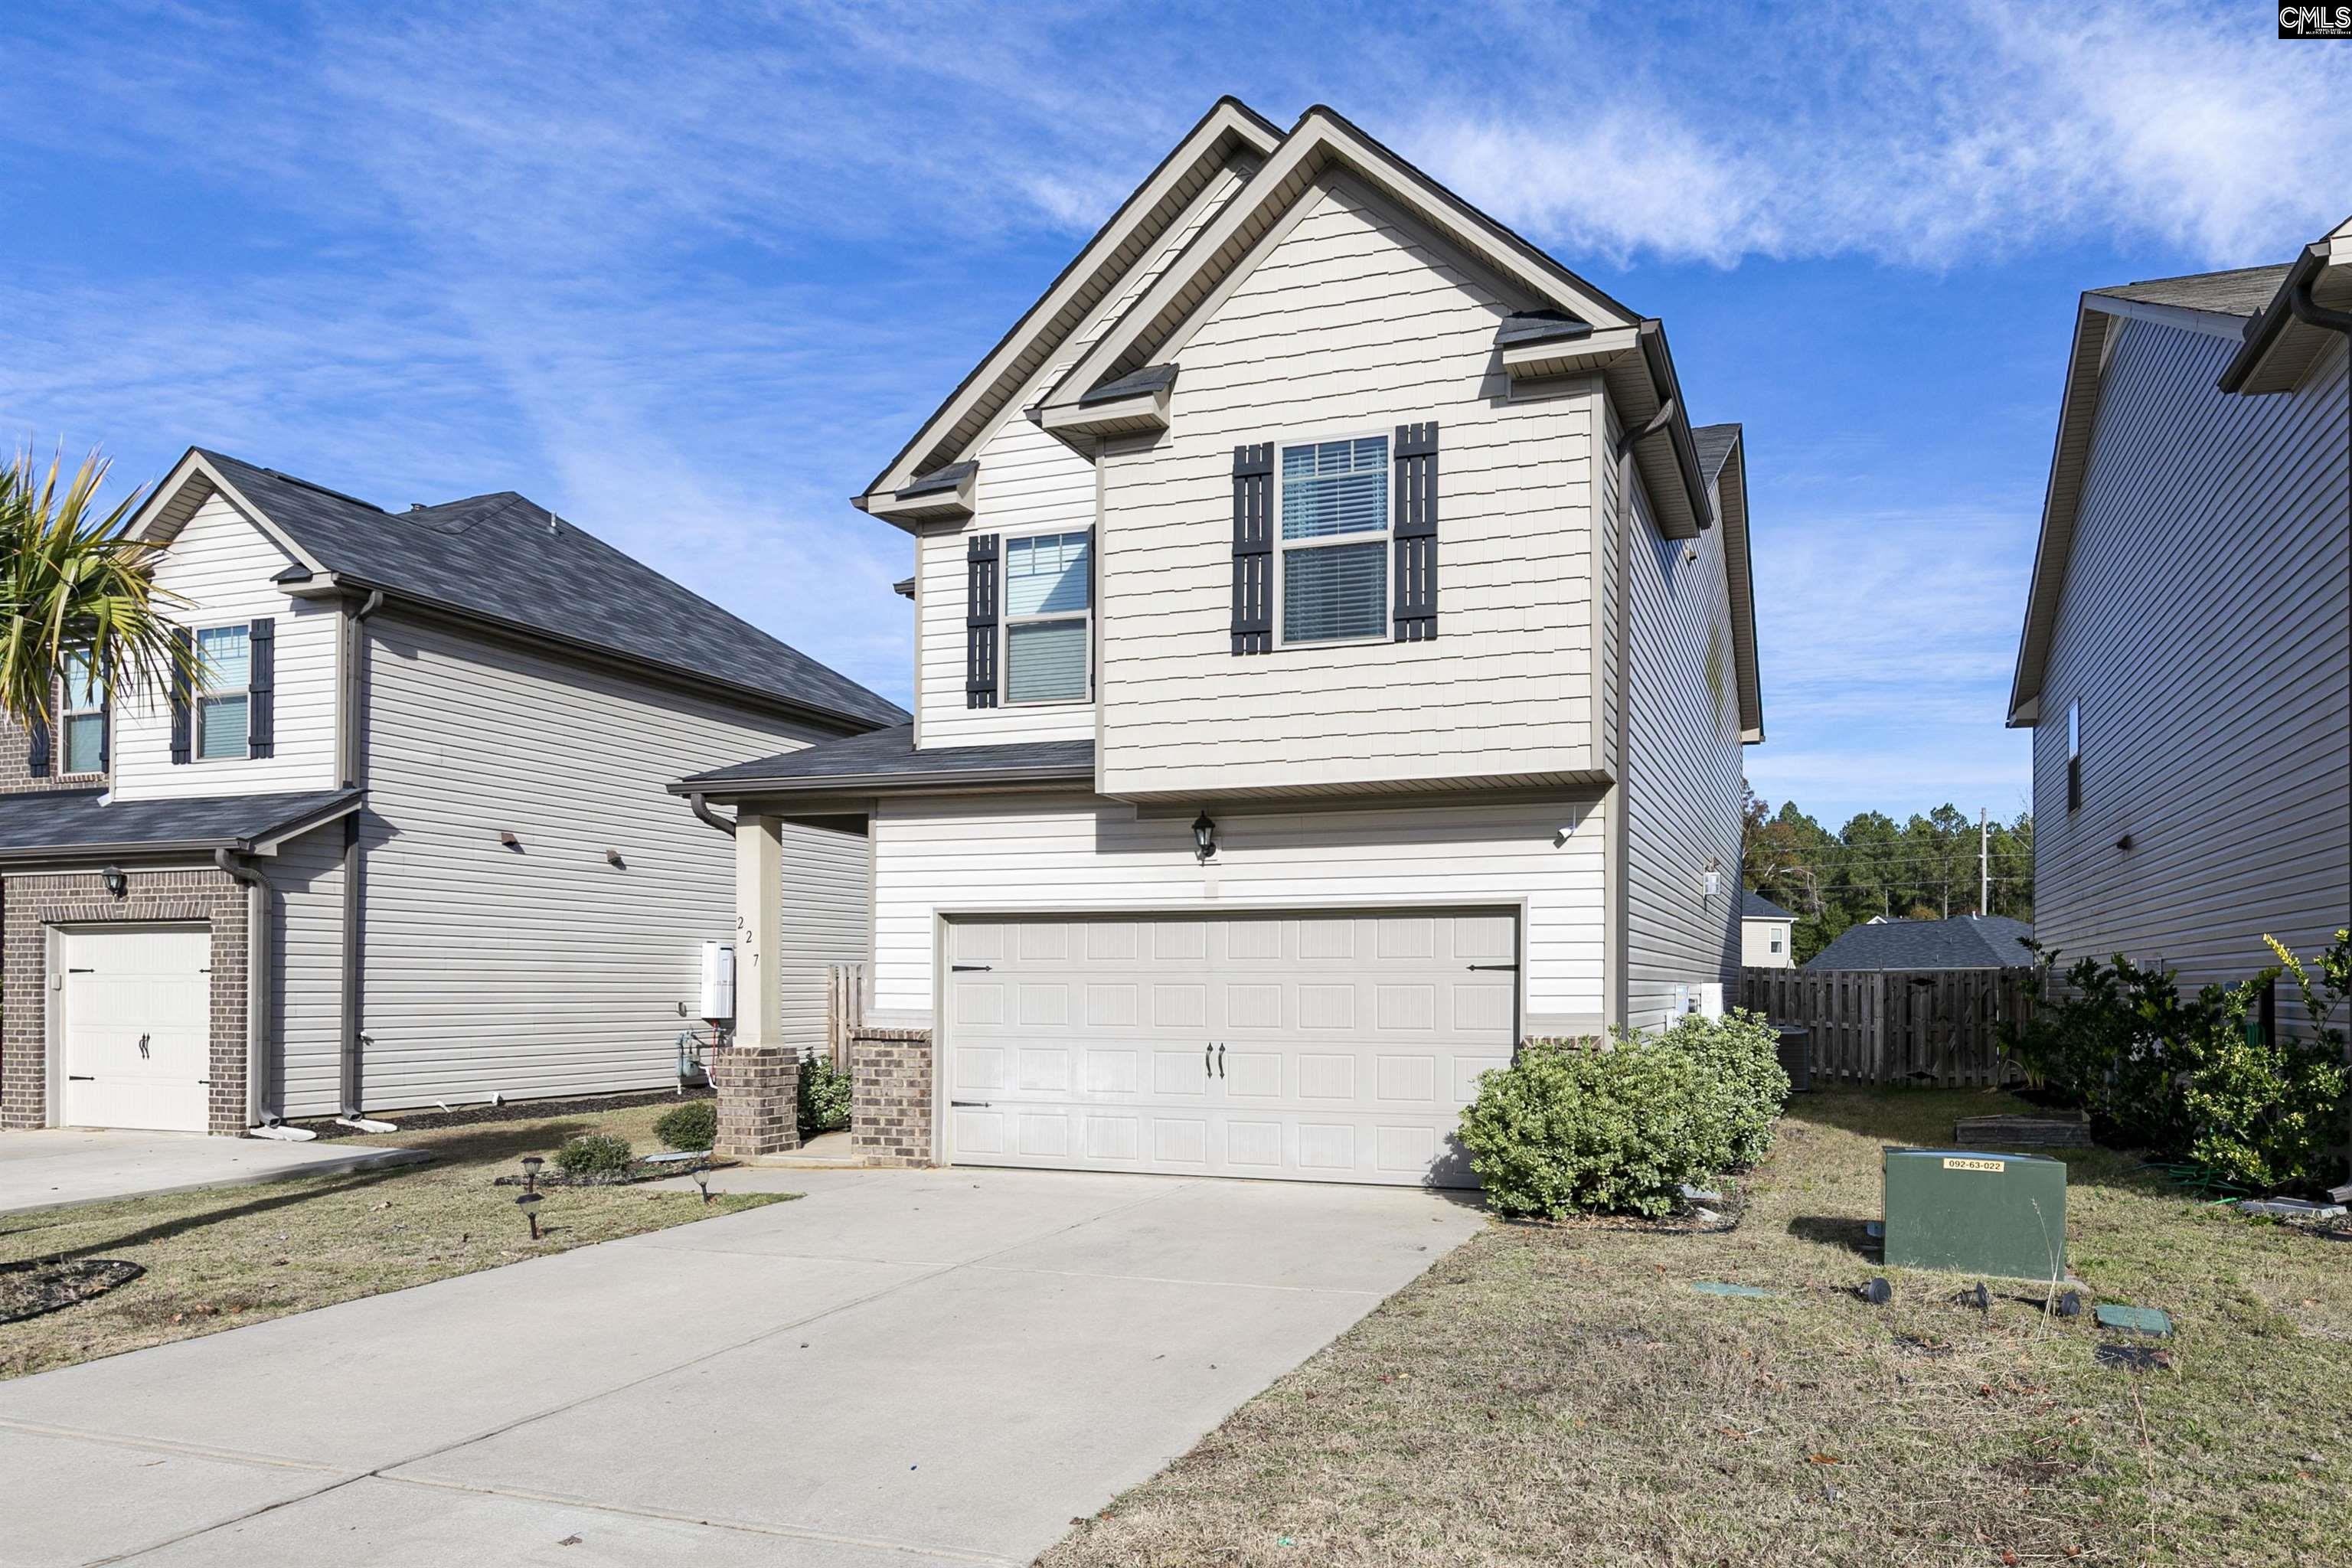 227 Bickley View Court, Chapin, SC 29036 Listing Photo 2